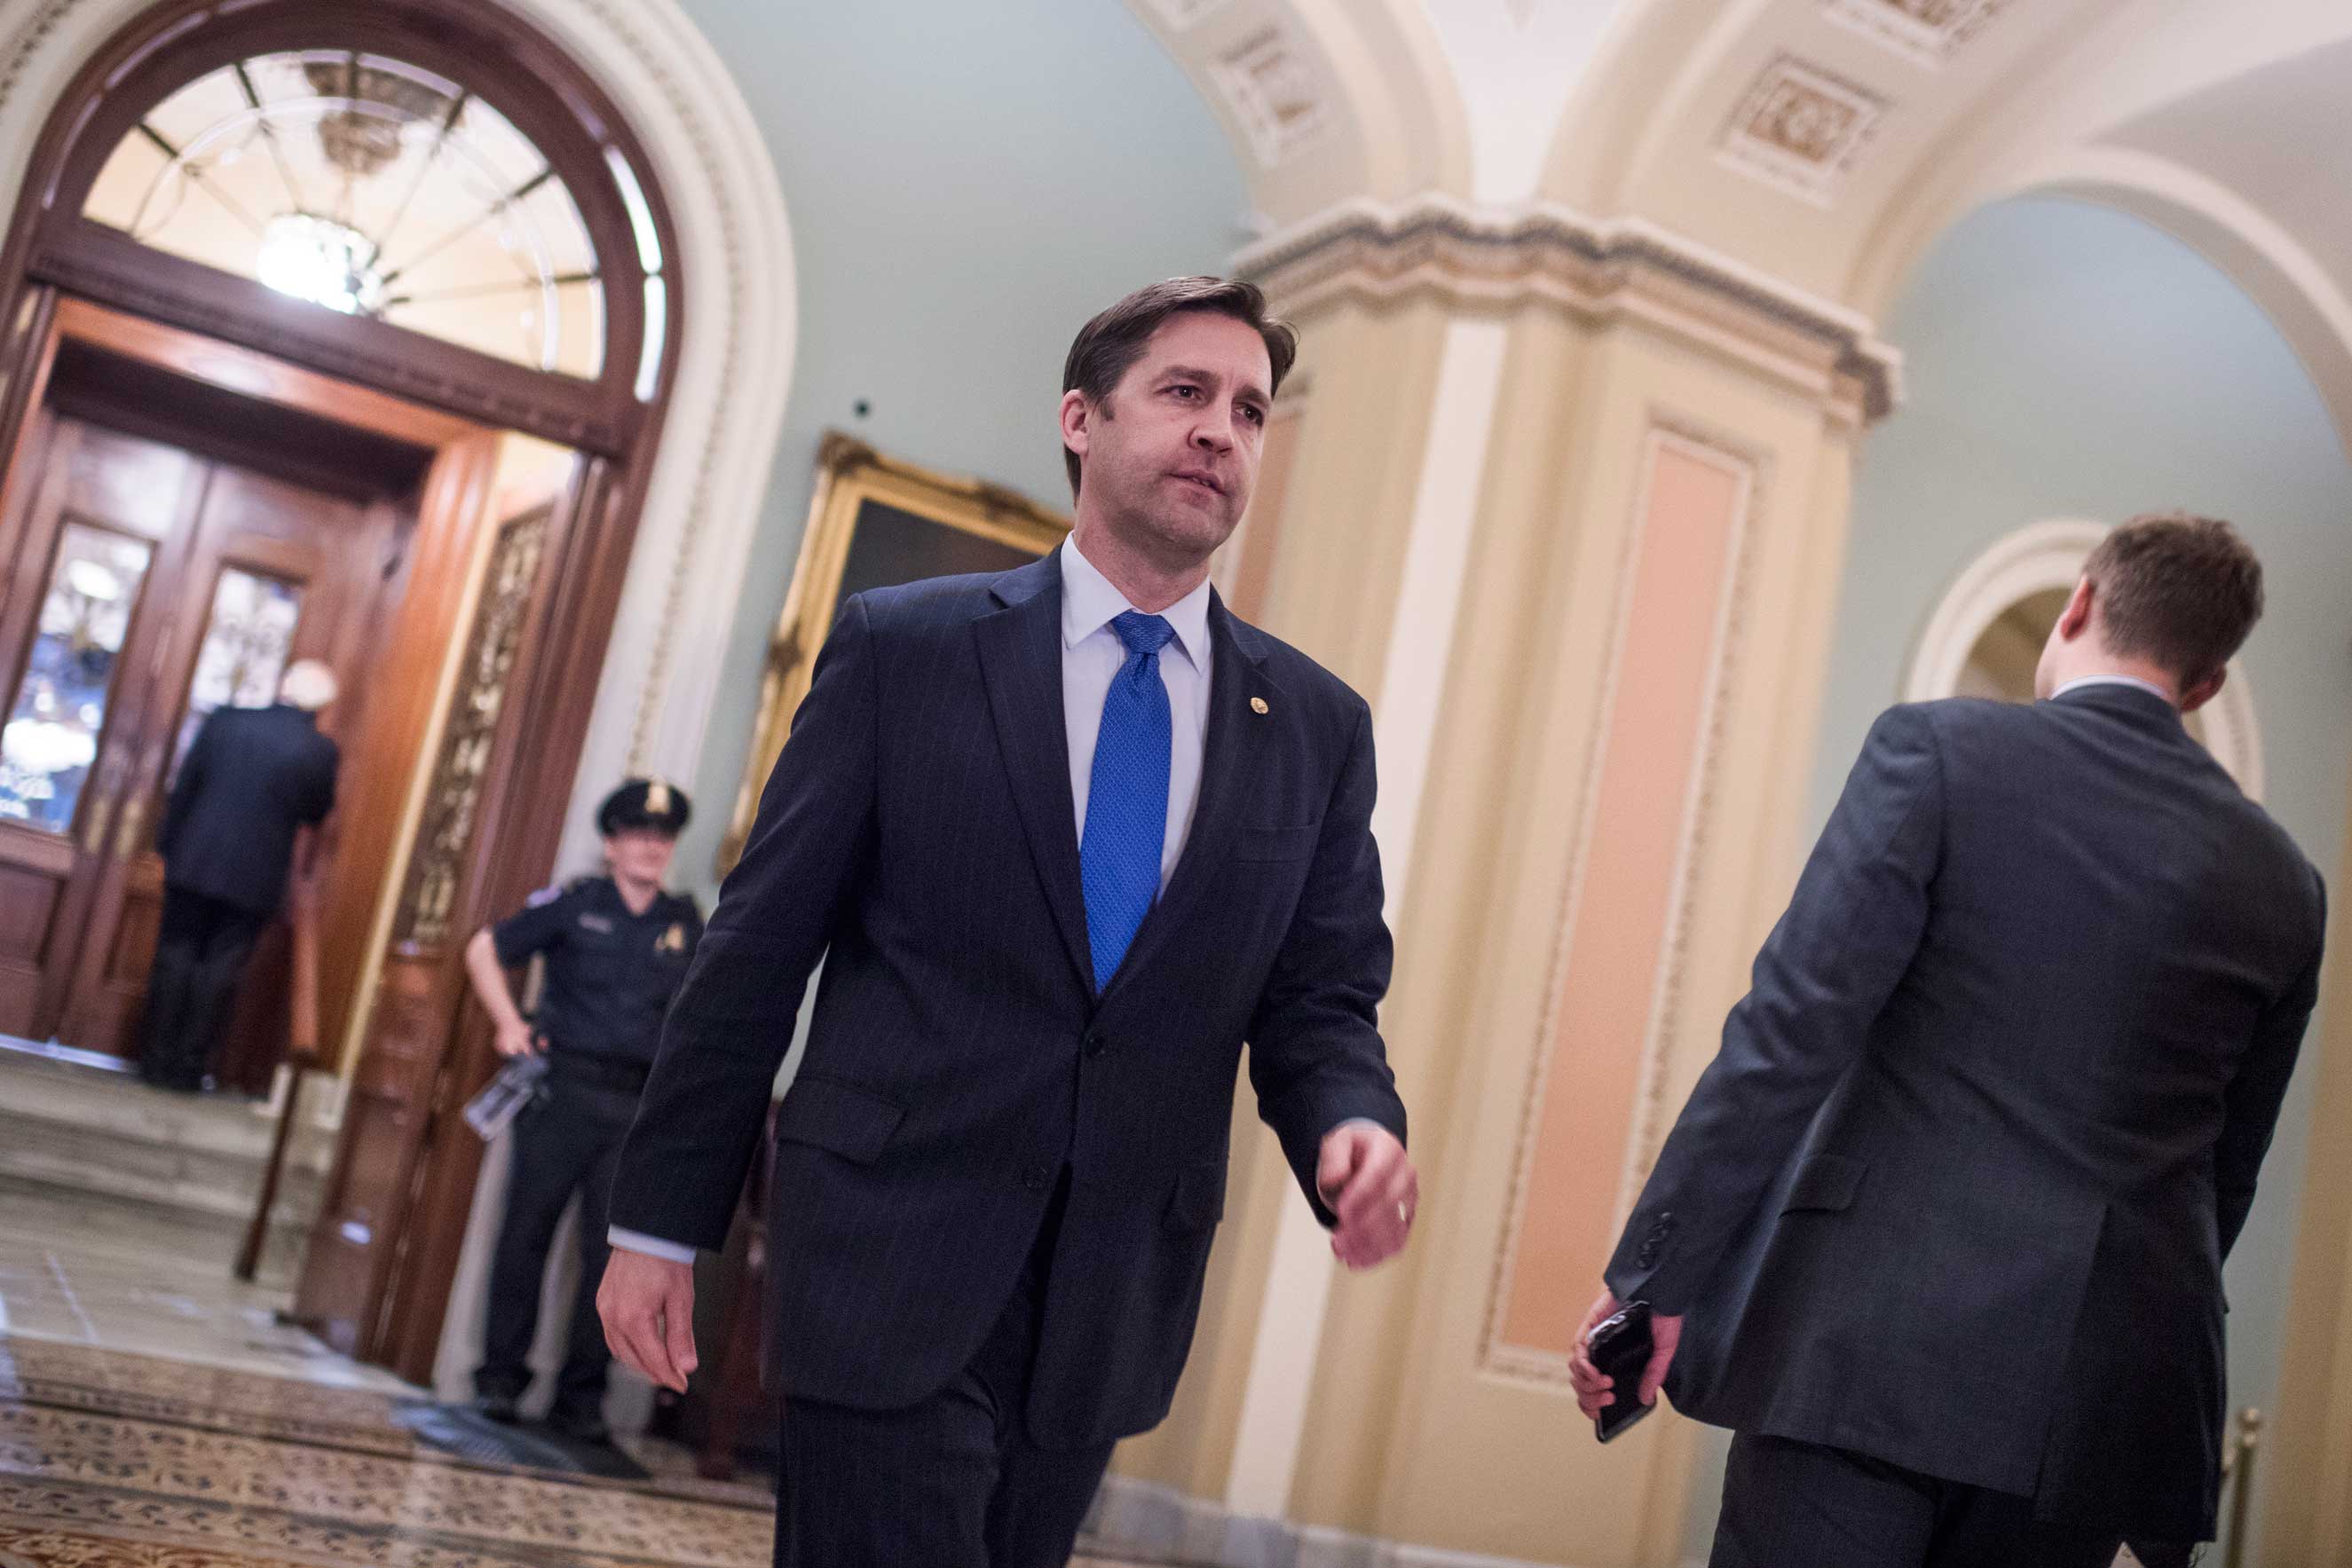 Sen. Ben Sasse, R-Neb., is seen in the Capitol's Ohio Clock Corridor after a vote in the Senate where they invoked the "nuclear option" which allows for a majority vote to confirm a Supreme Court justice nominee, April 6, 2017. (Getty Images)